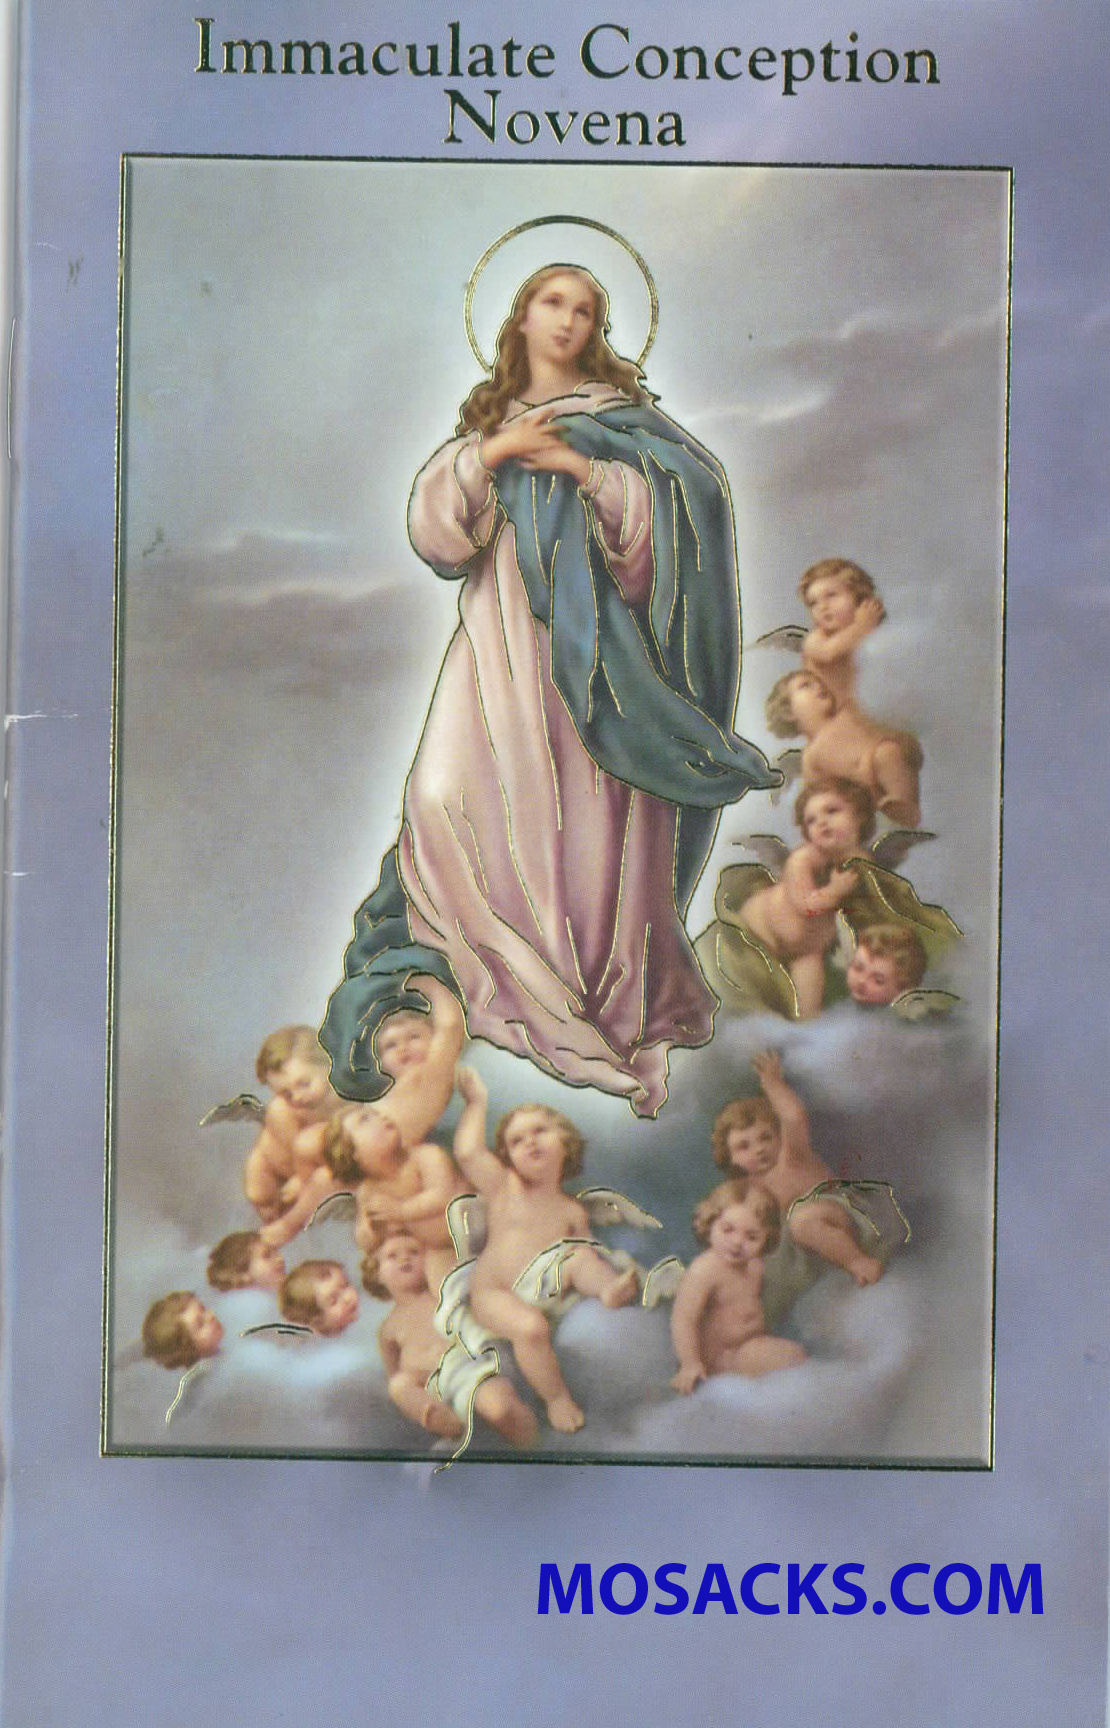 Immaculate Conception Novena Prayer Book with Prayers is 3.75" x 5-7/8" and 24 pages beautifully illustrated with Italian Fratelli-Bonella Artwork and original text by Daniel A. Lord, S.J.